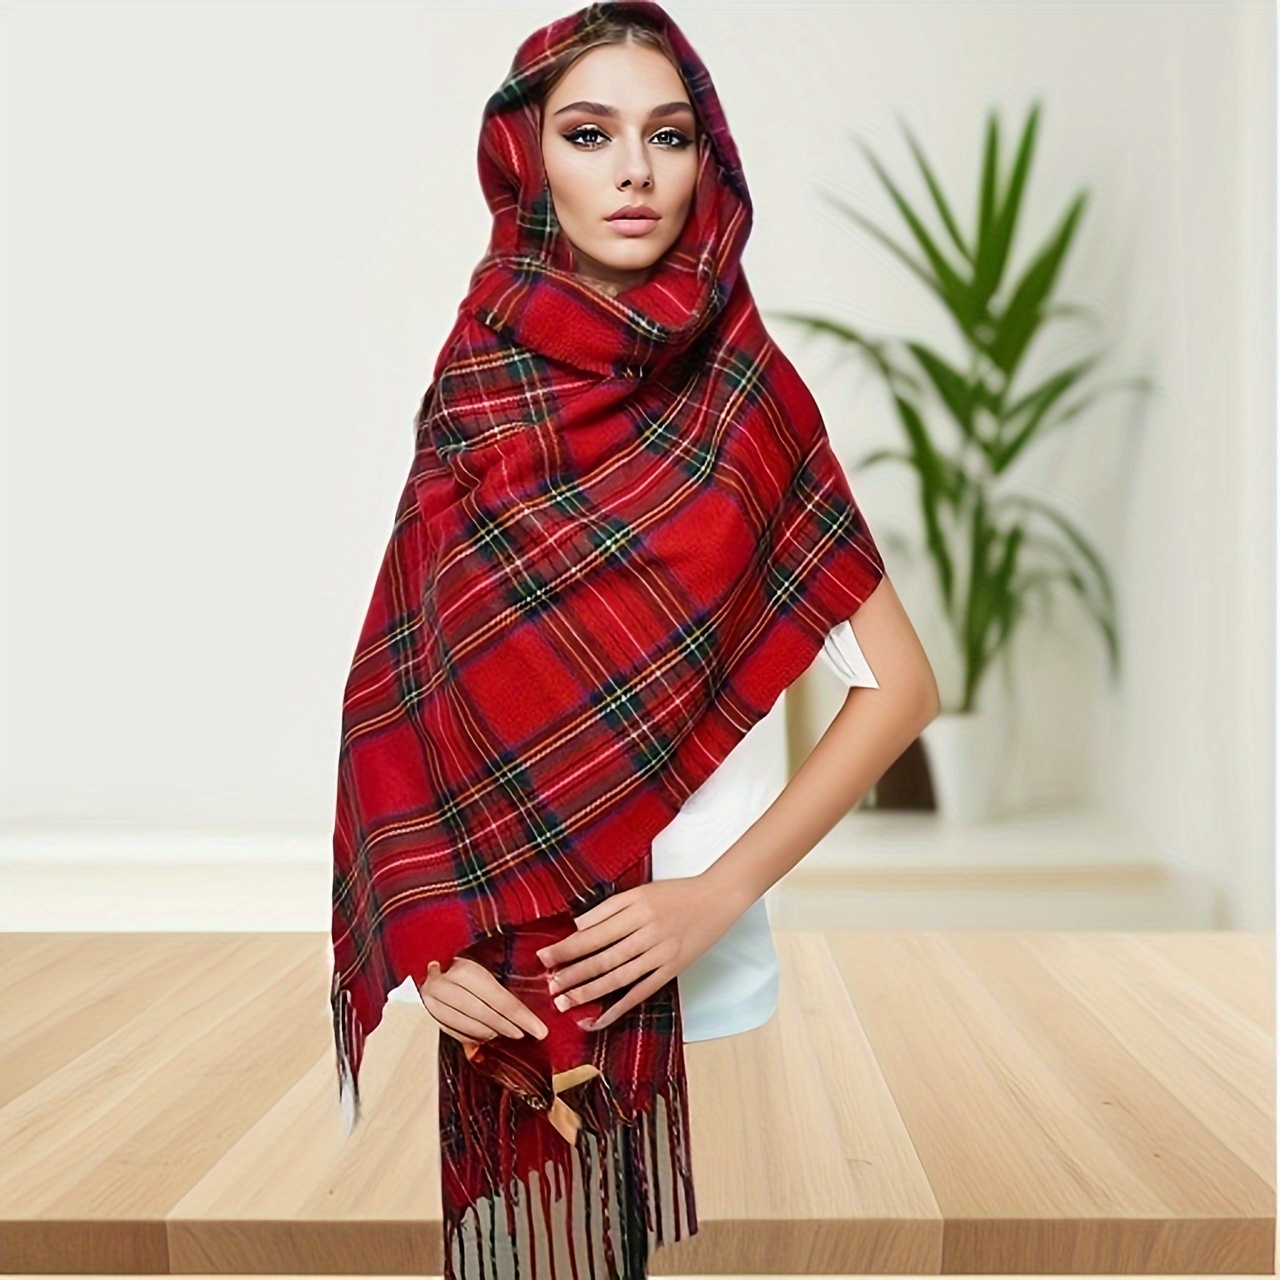 

Red British Plaid Scarf Soft Warm Tassel Shawl School Style Coldproof Windproof Wrap For Women